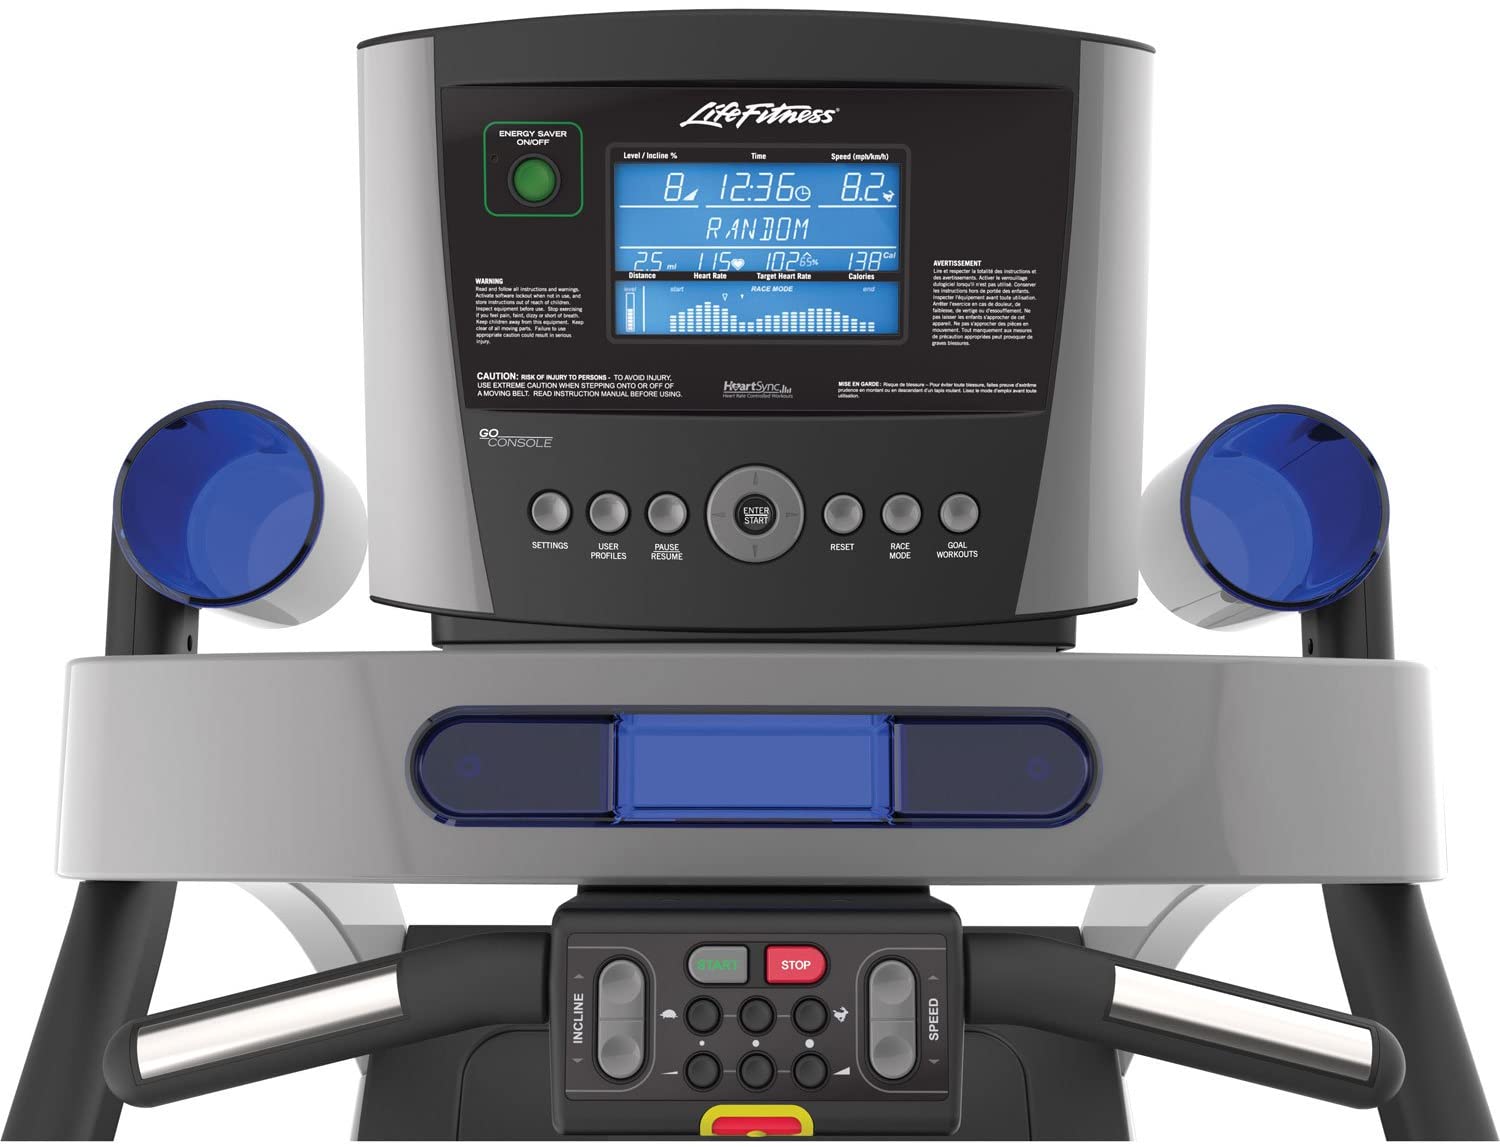 Life Fitness T5 Treadmill with Go Console controls again